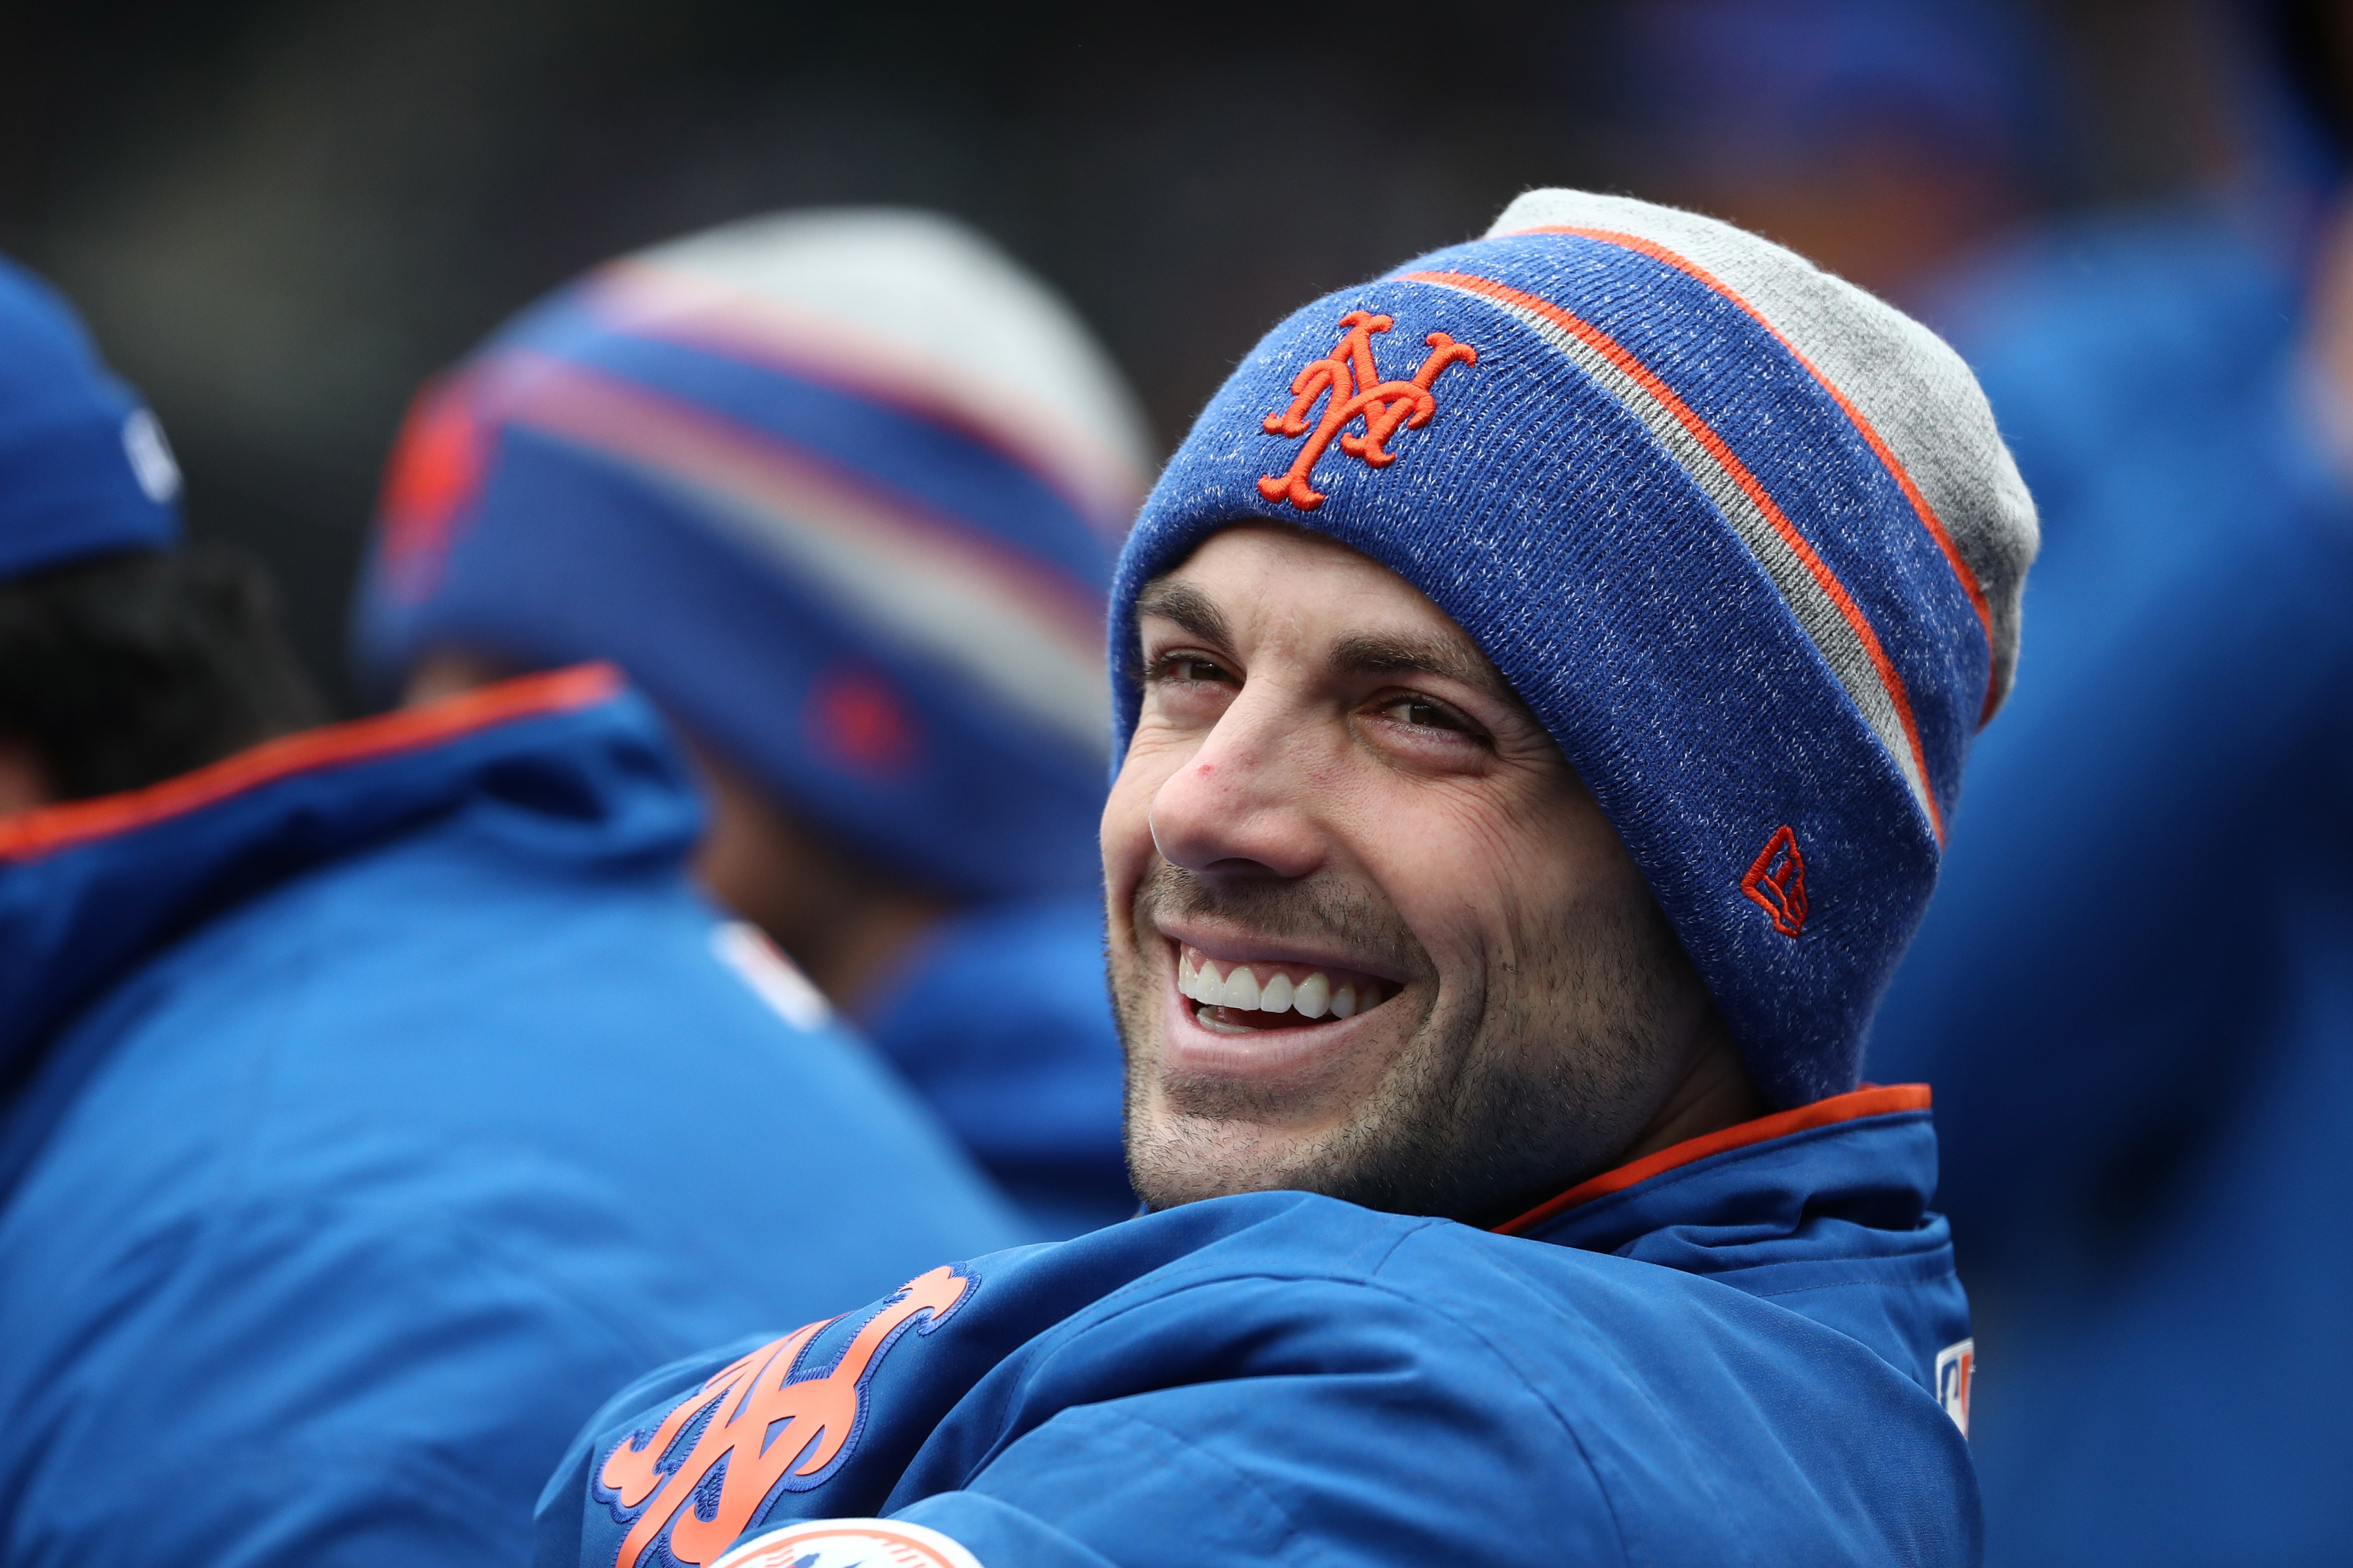 David Wright retirement: Insurance coverage on the rest of the